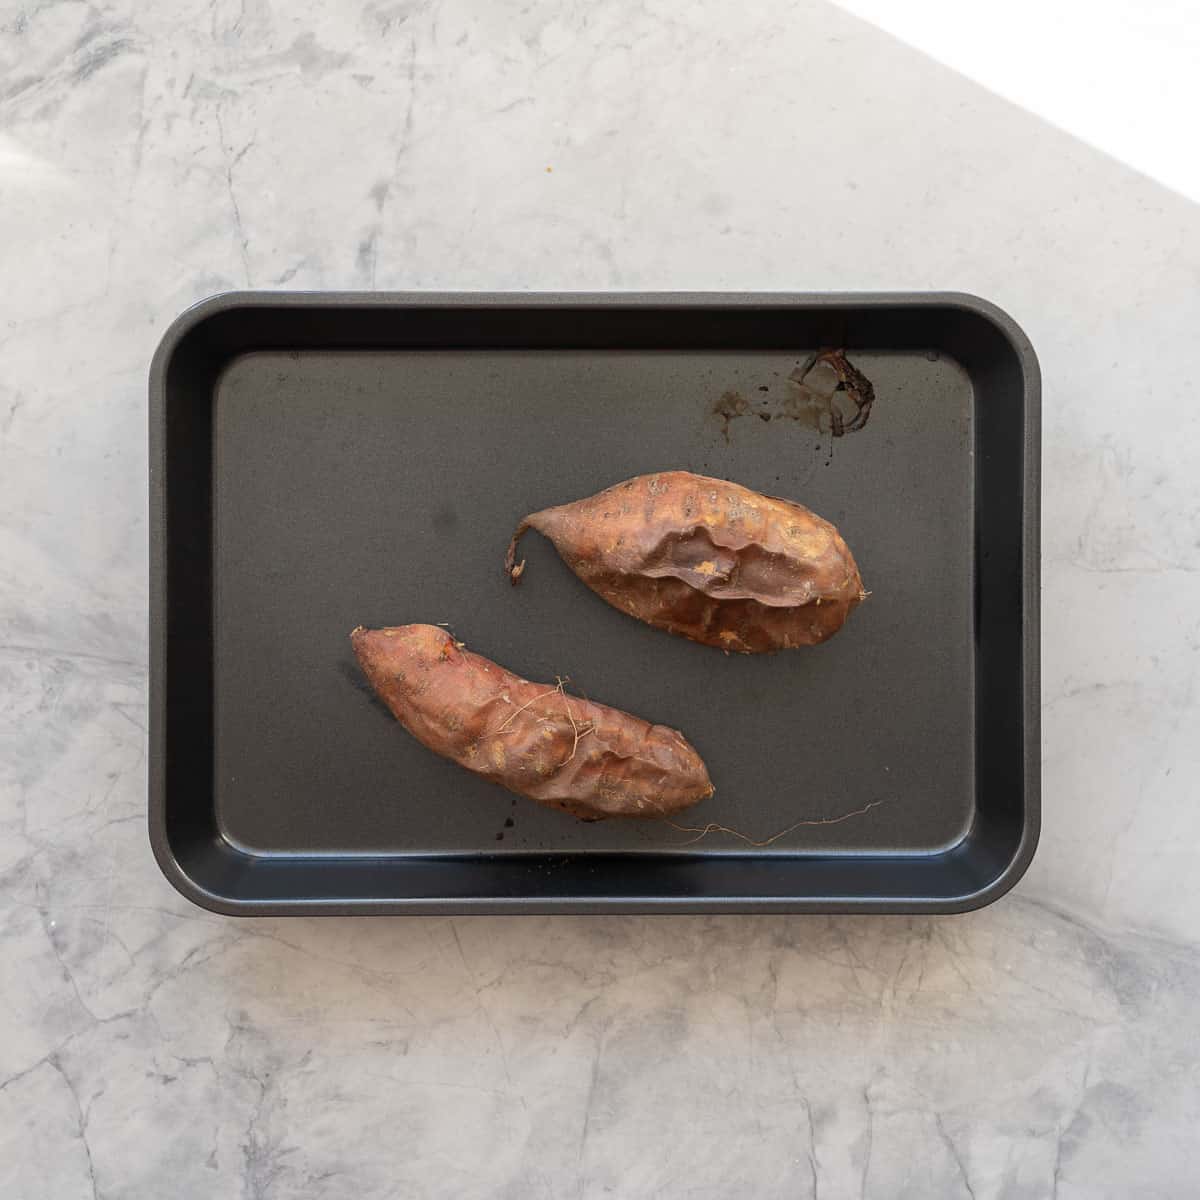 Two roasted sweet potato with their skins on sitting in a on a baking tray.